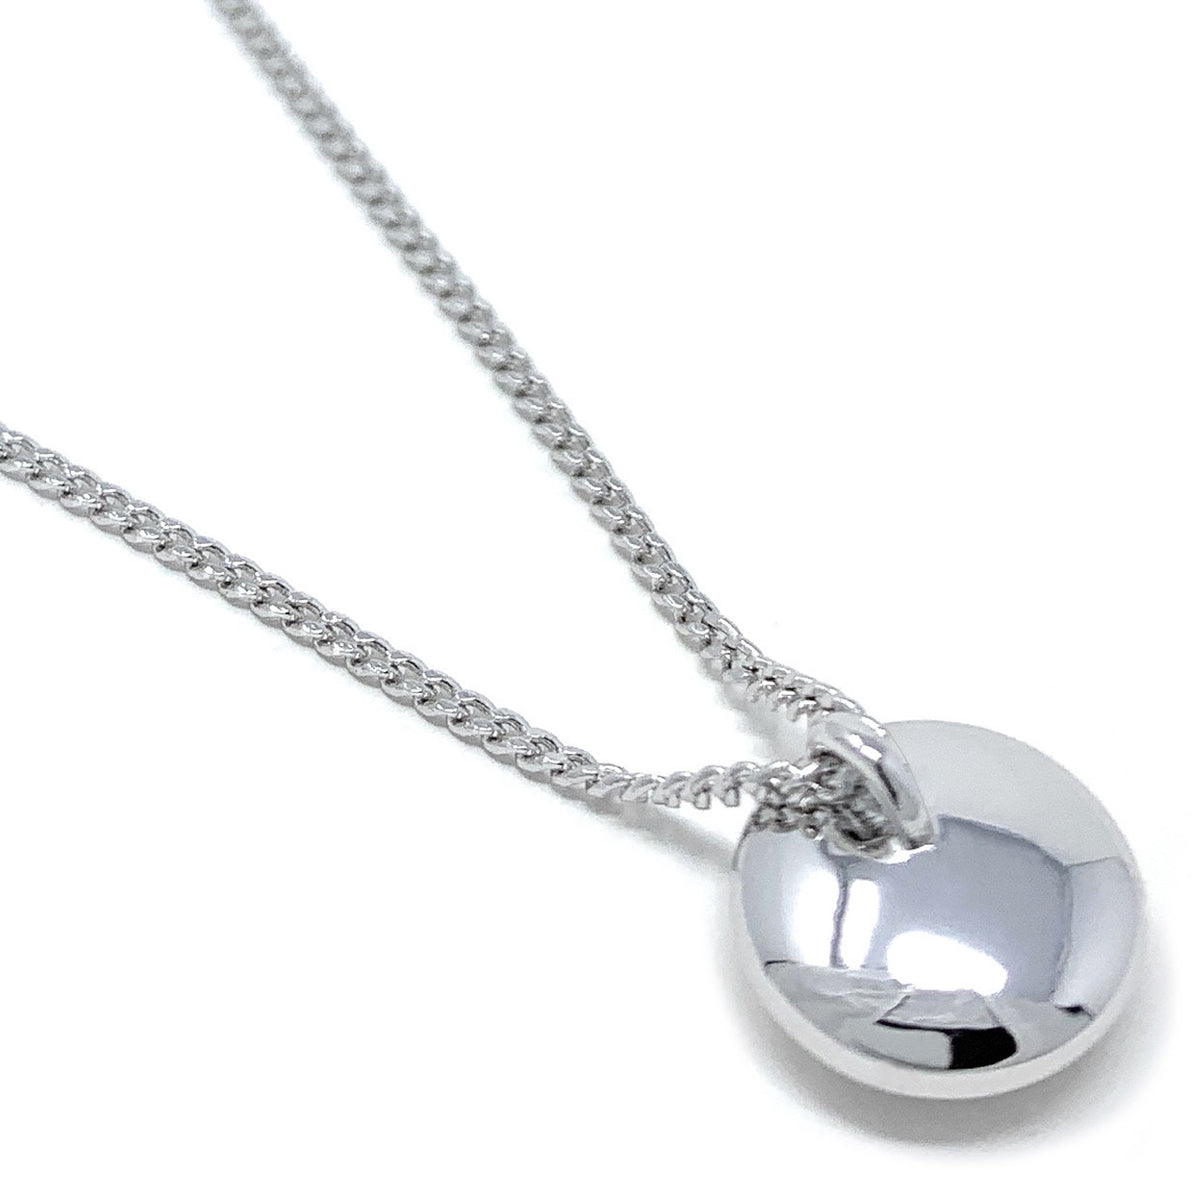 Halo Pave Pendant Necklace with Black Diamond Round Crystals from Swarovski Silver Toned Rhodium Plated - Ed Heart